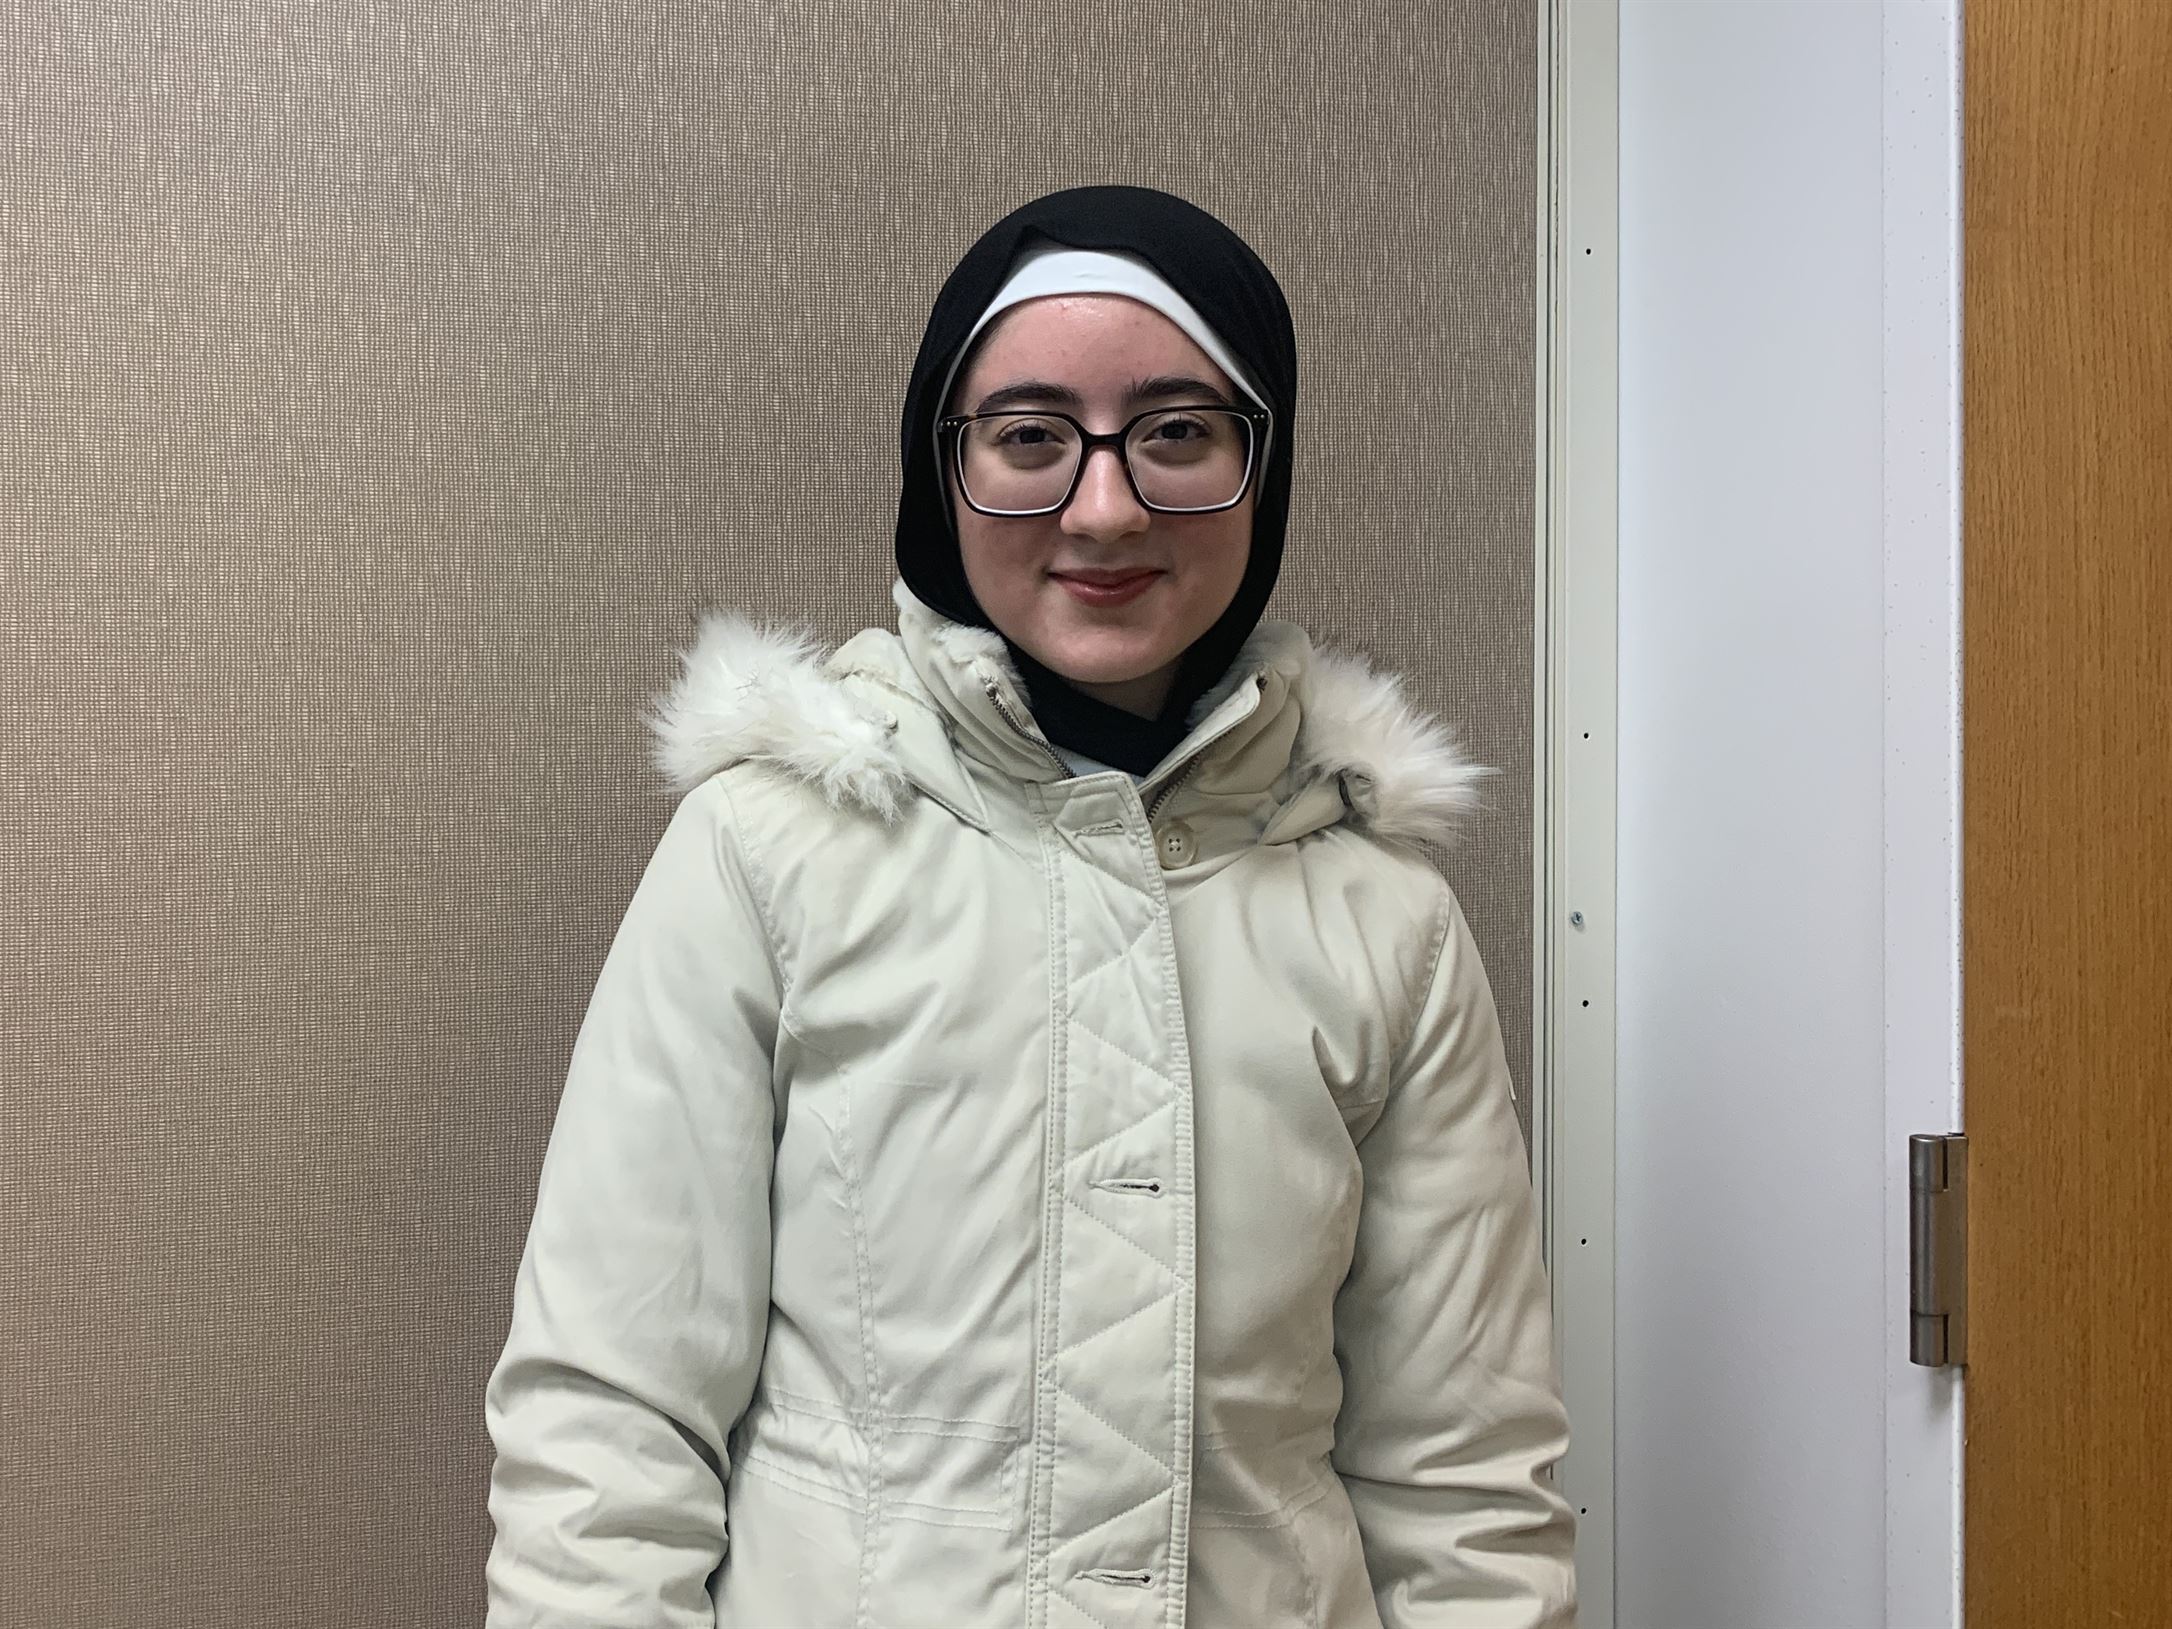 Nadeen Khashashina, a junior biology major and Red Hawk Pantry volunteer, is pleased that the university offers this resource to students.
Roxanne Gribbin | The Montclarion